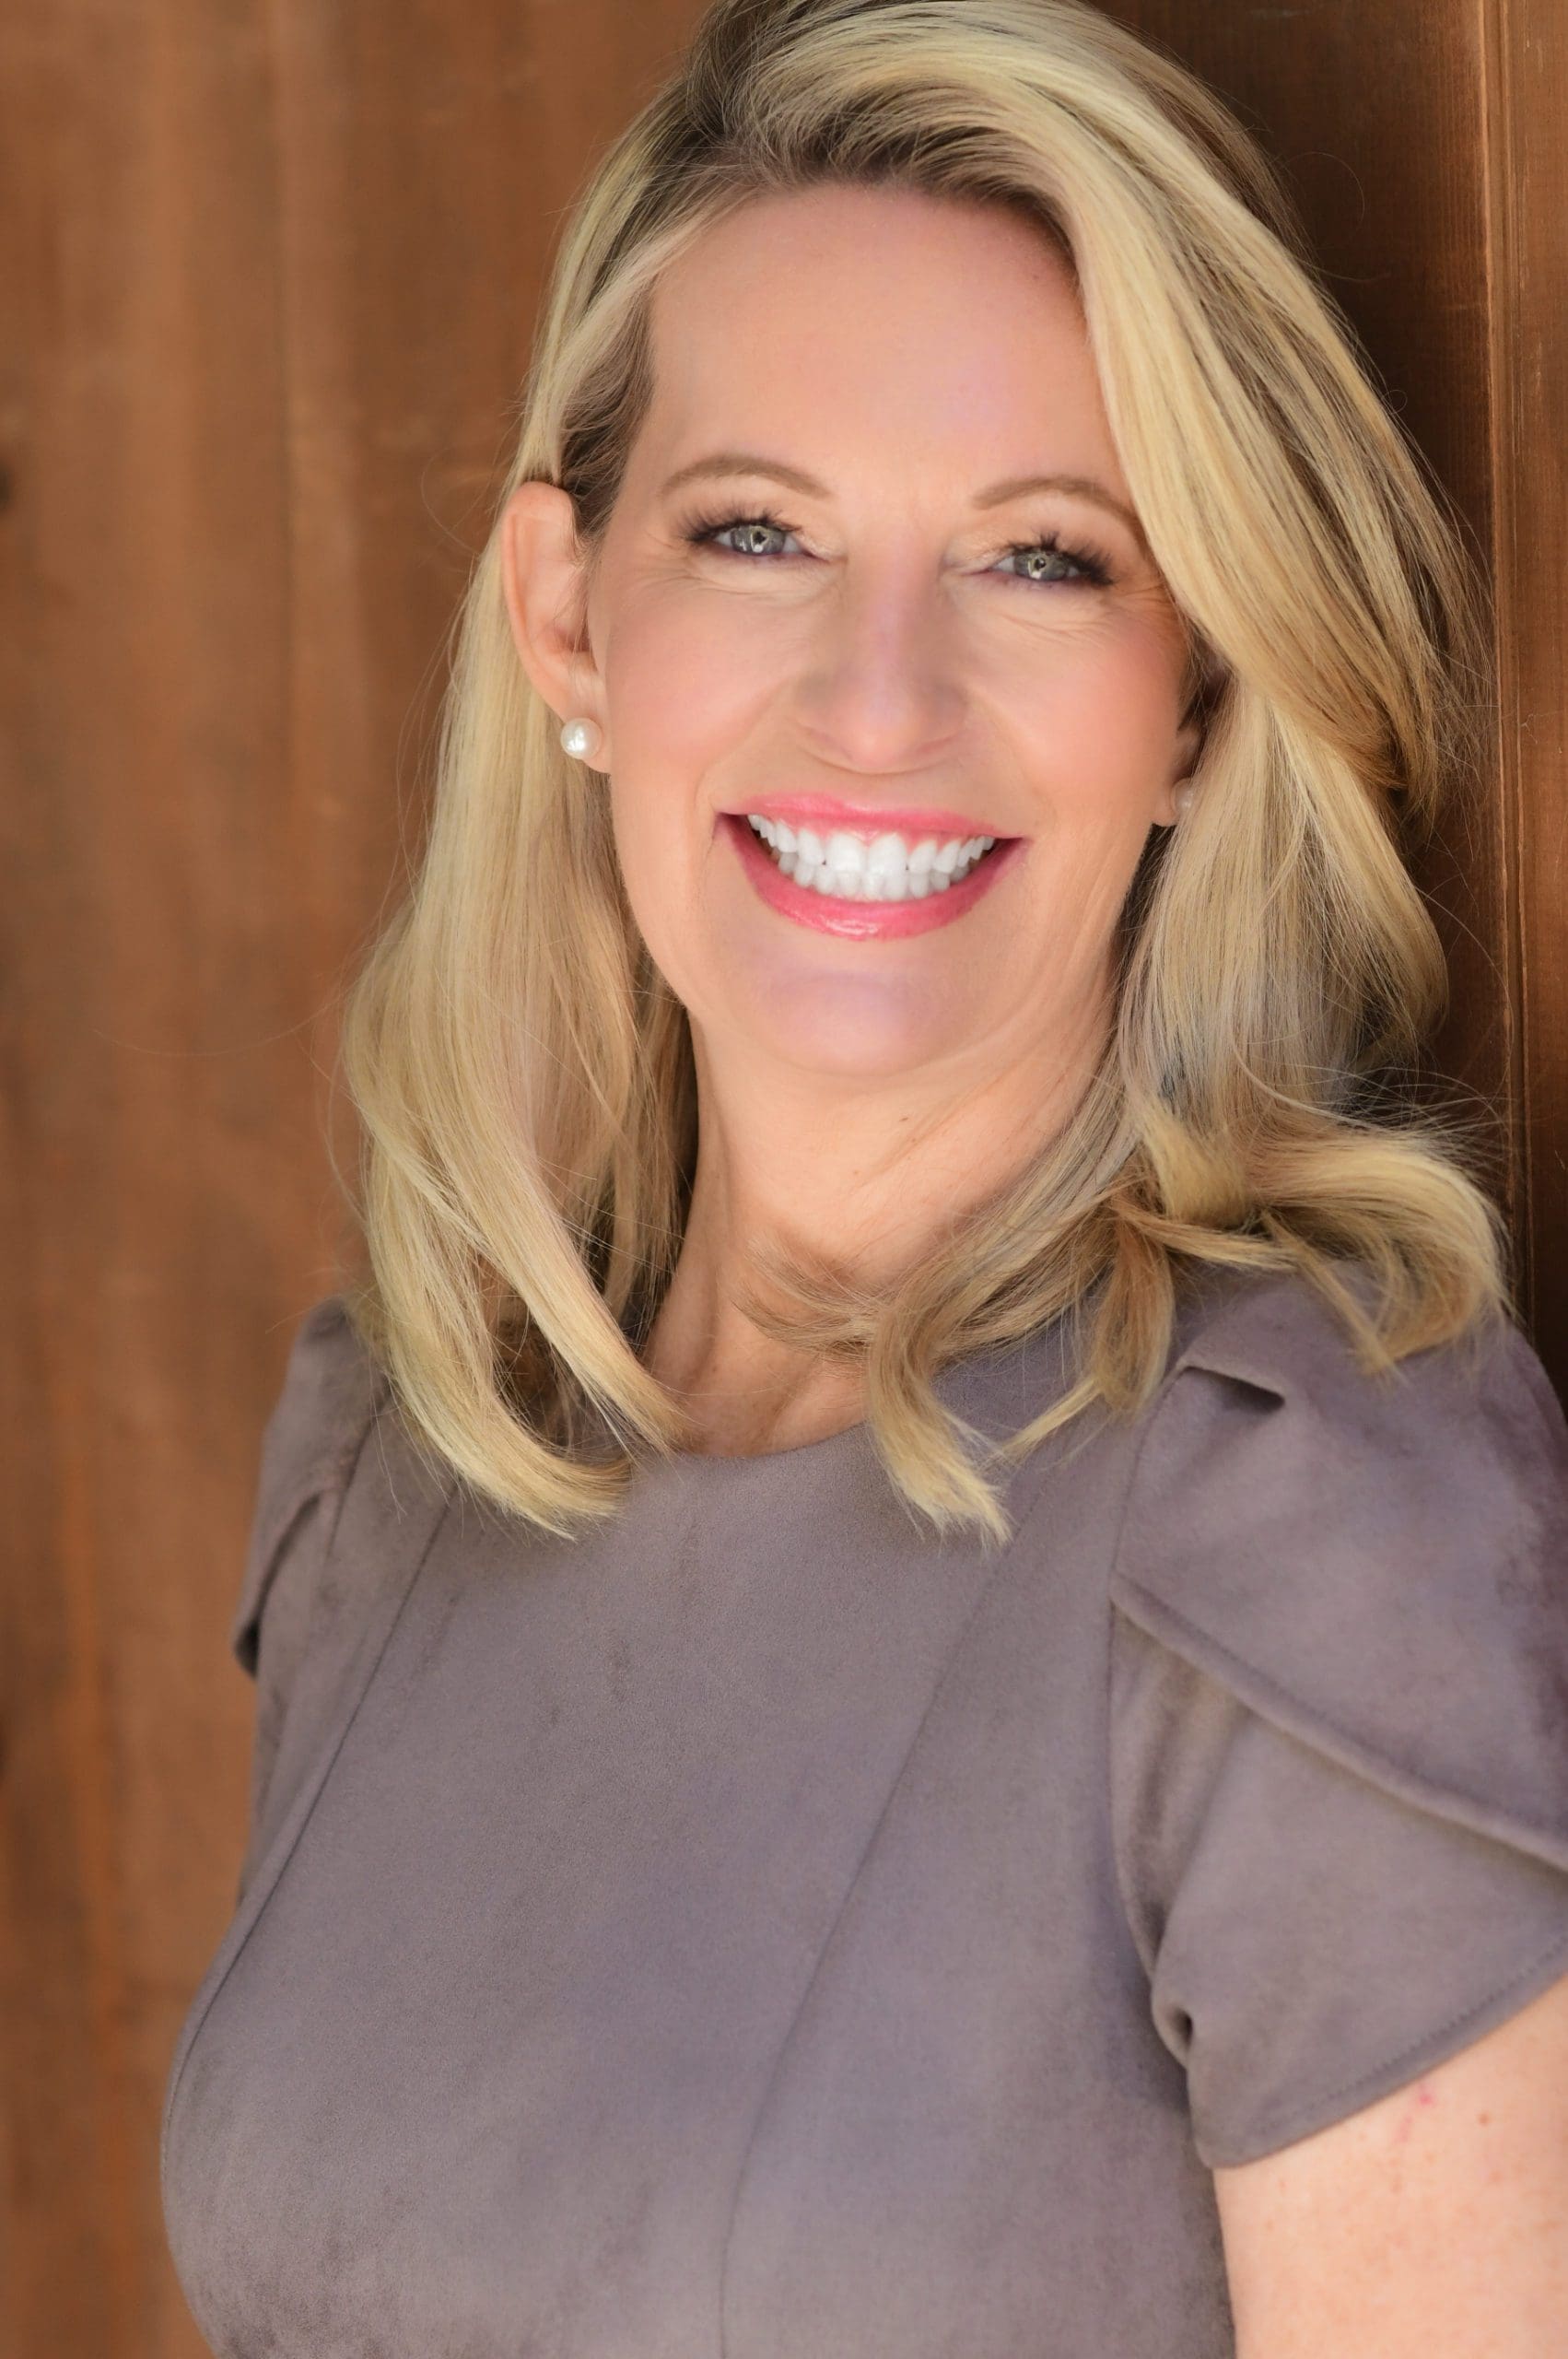 Portrait of Kelly Hyman, attorney at The Hyman Law Firm P.A., featuring her engaging smile against a warm wooden background. She is dressed in a professional grey outfit with pearl earrings, capturing a blend of approachability and professionalism.